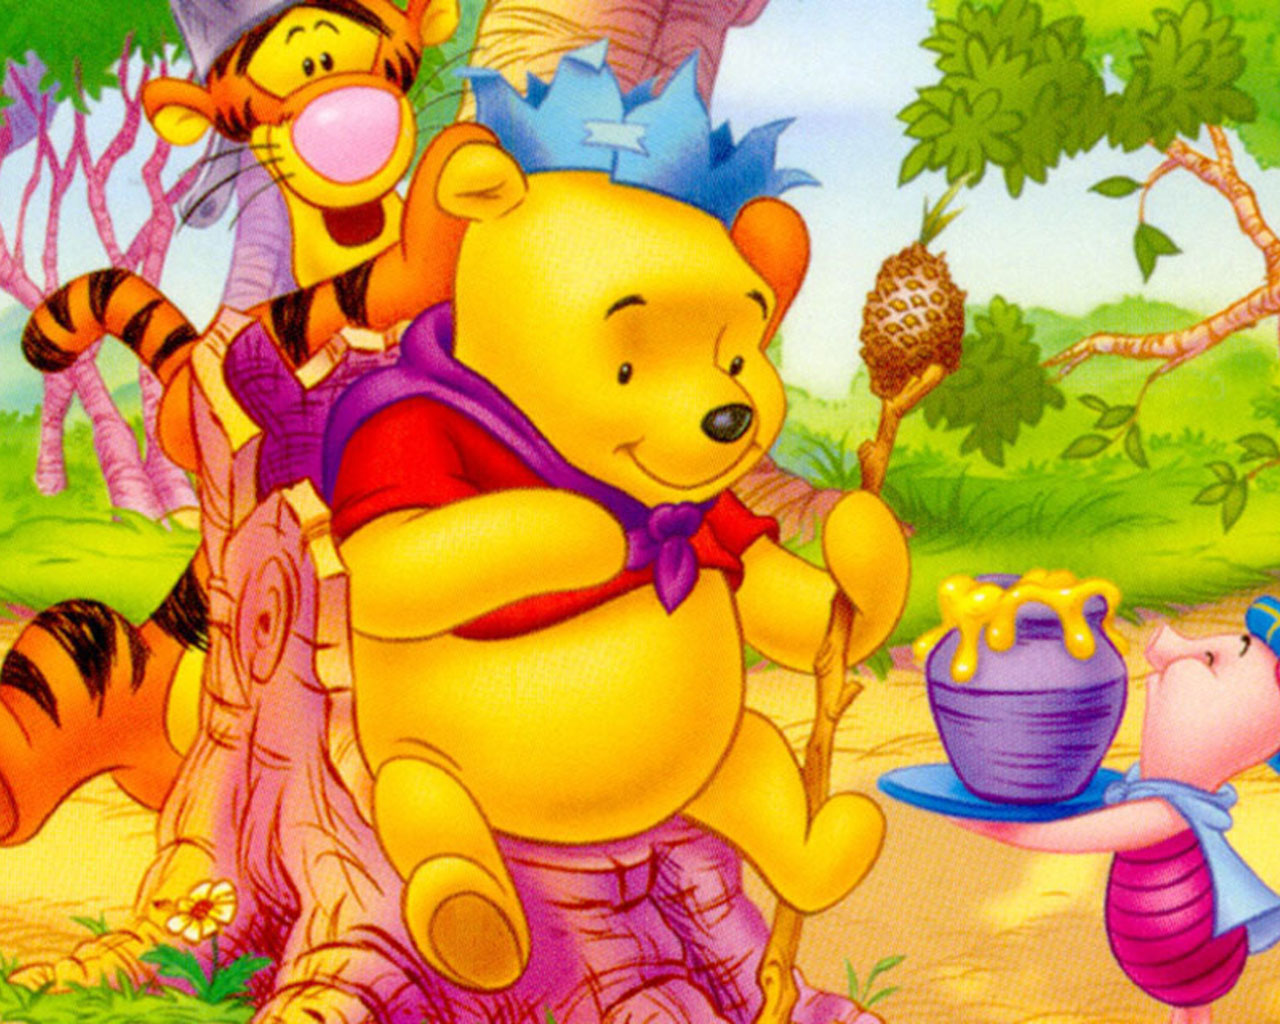 Winnie the Pooh Wallpaper 1280x1024 Wallpapers 1280x1024 Wallpapers